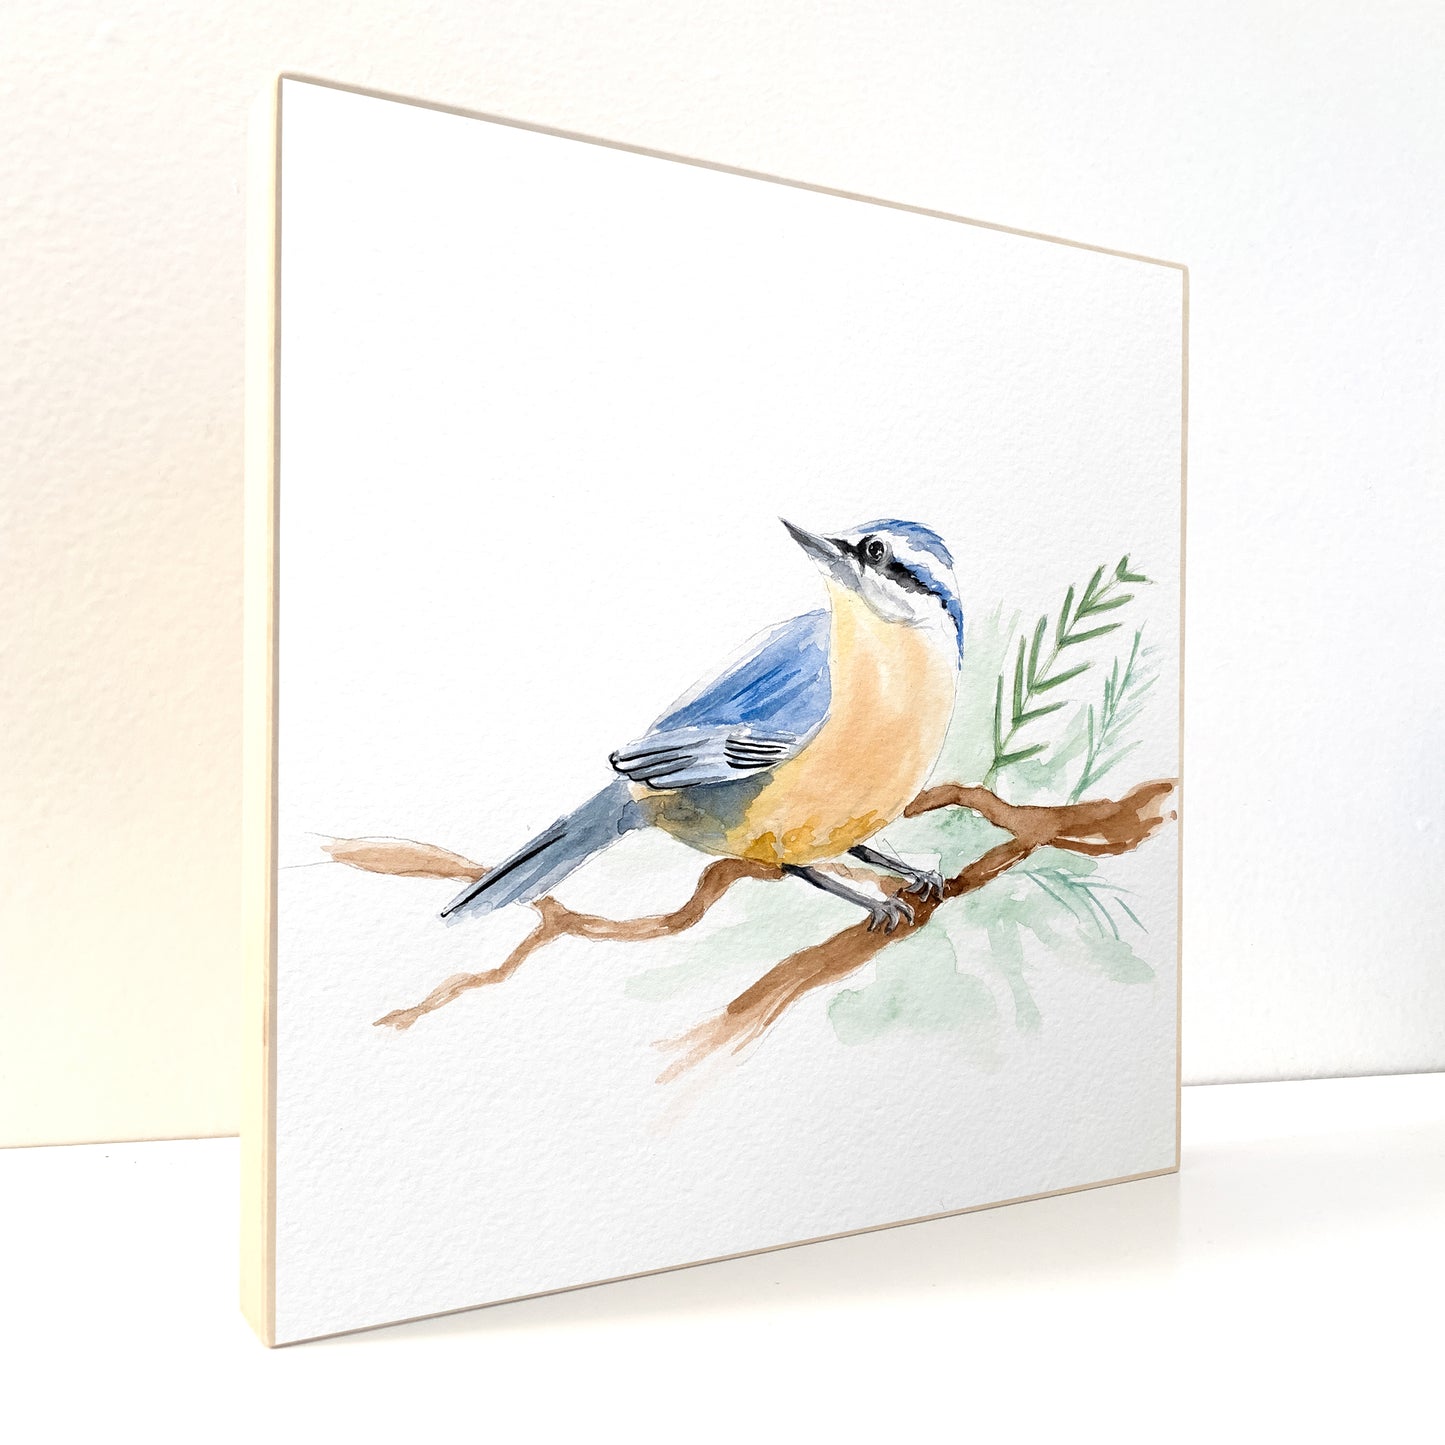 Nuthatch Bird - Watercolor on Woodblock - Flamingo Shores - Original Art for Home Decor and Gifts